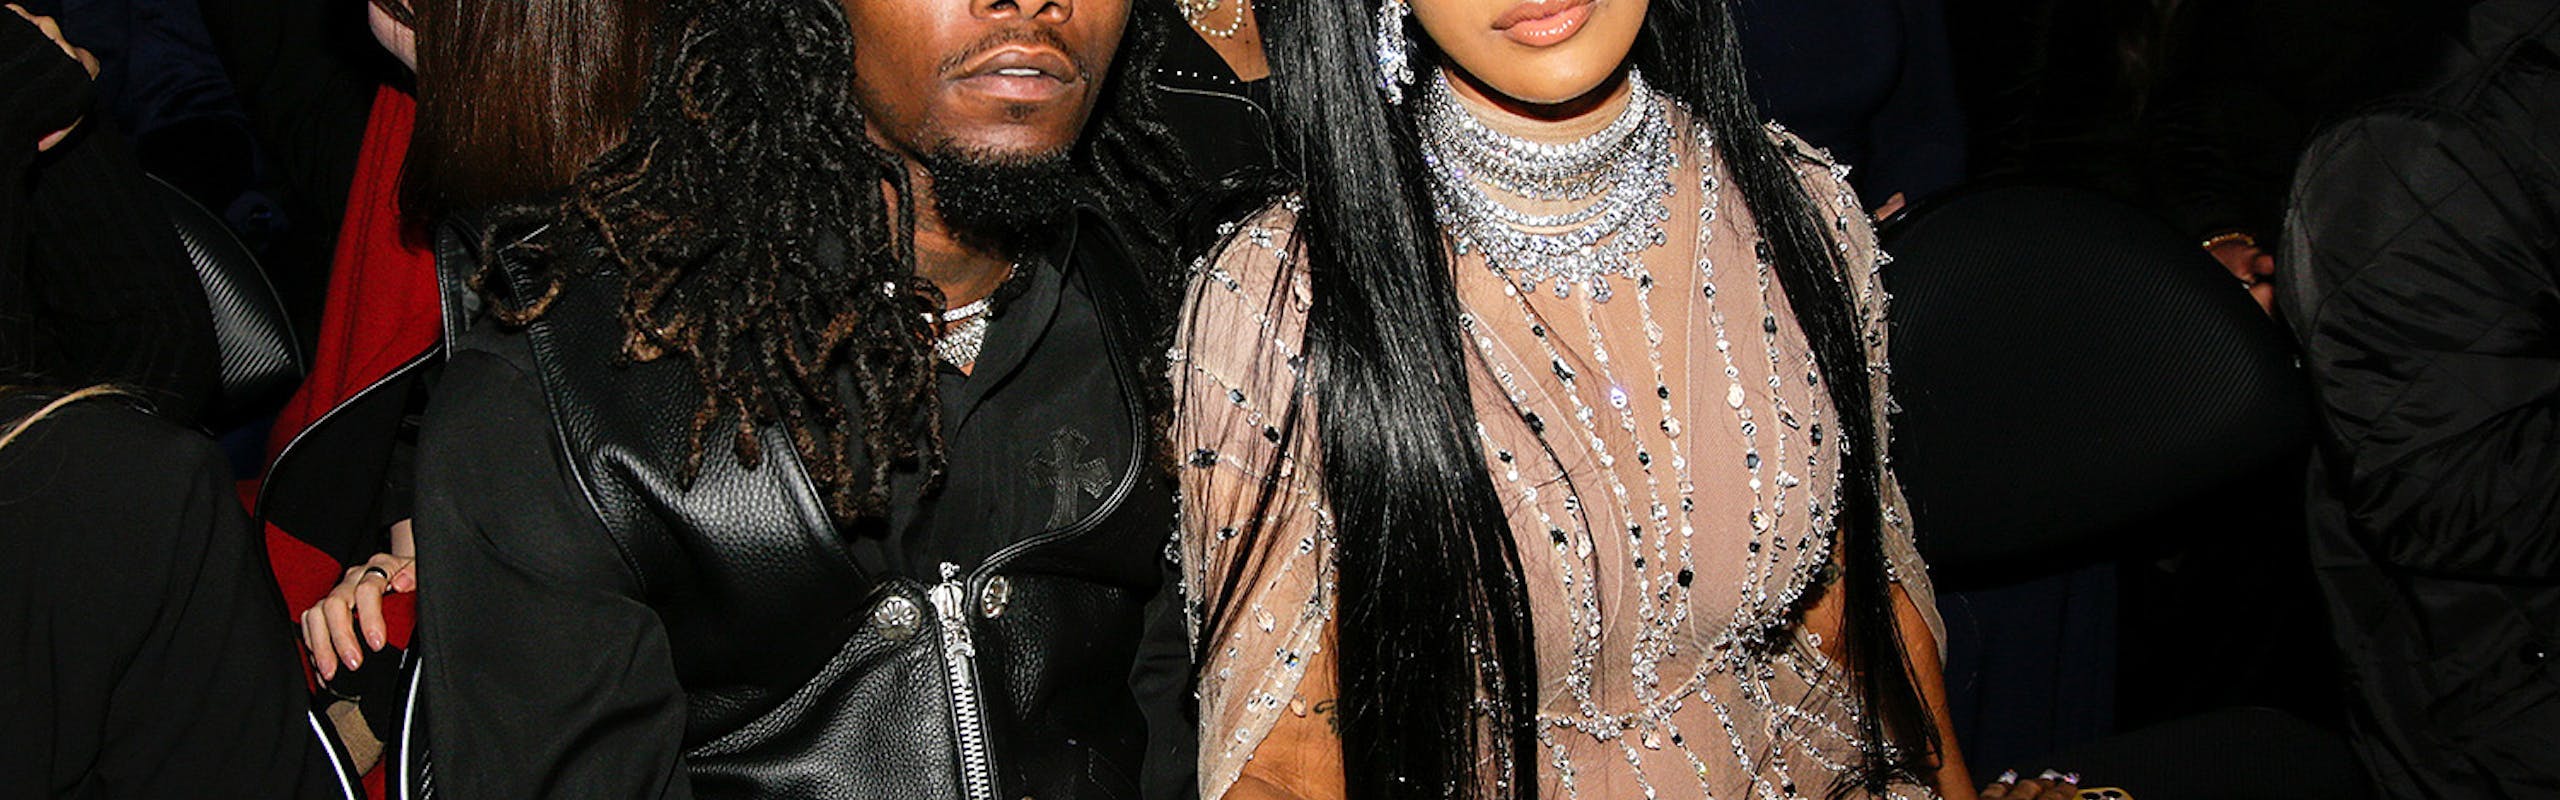 offset and cardi b